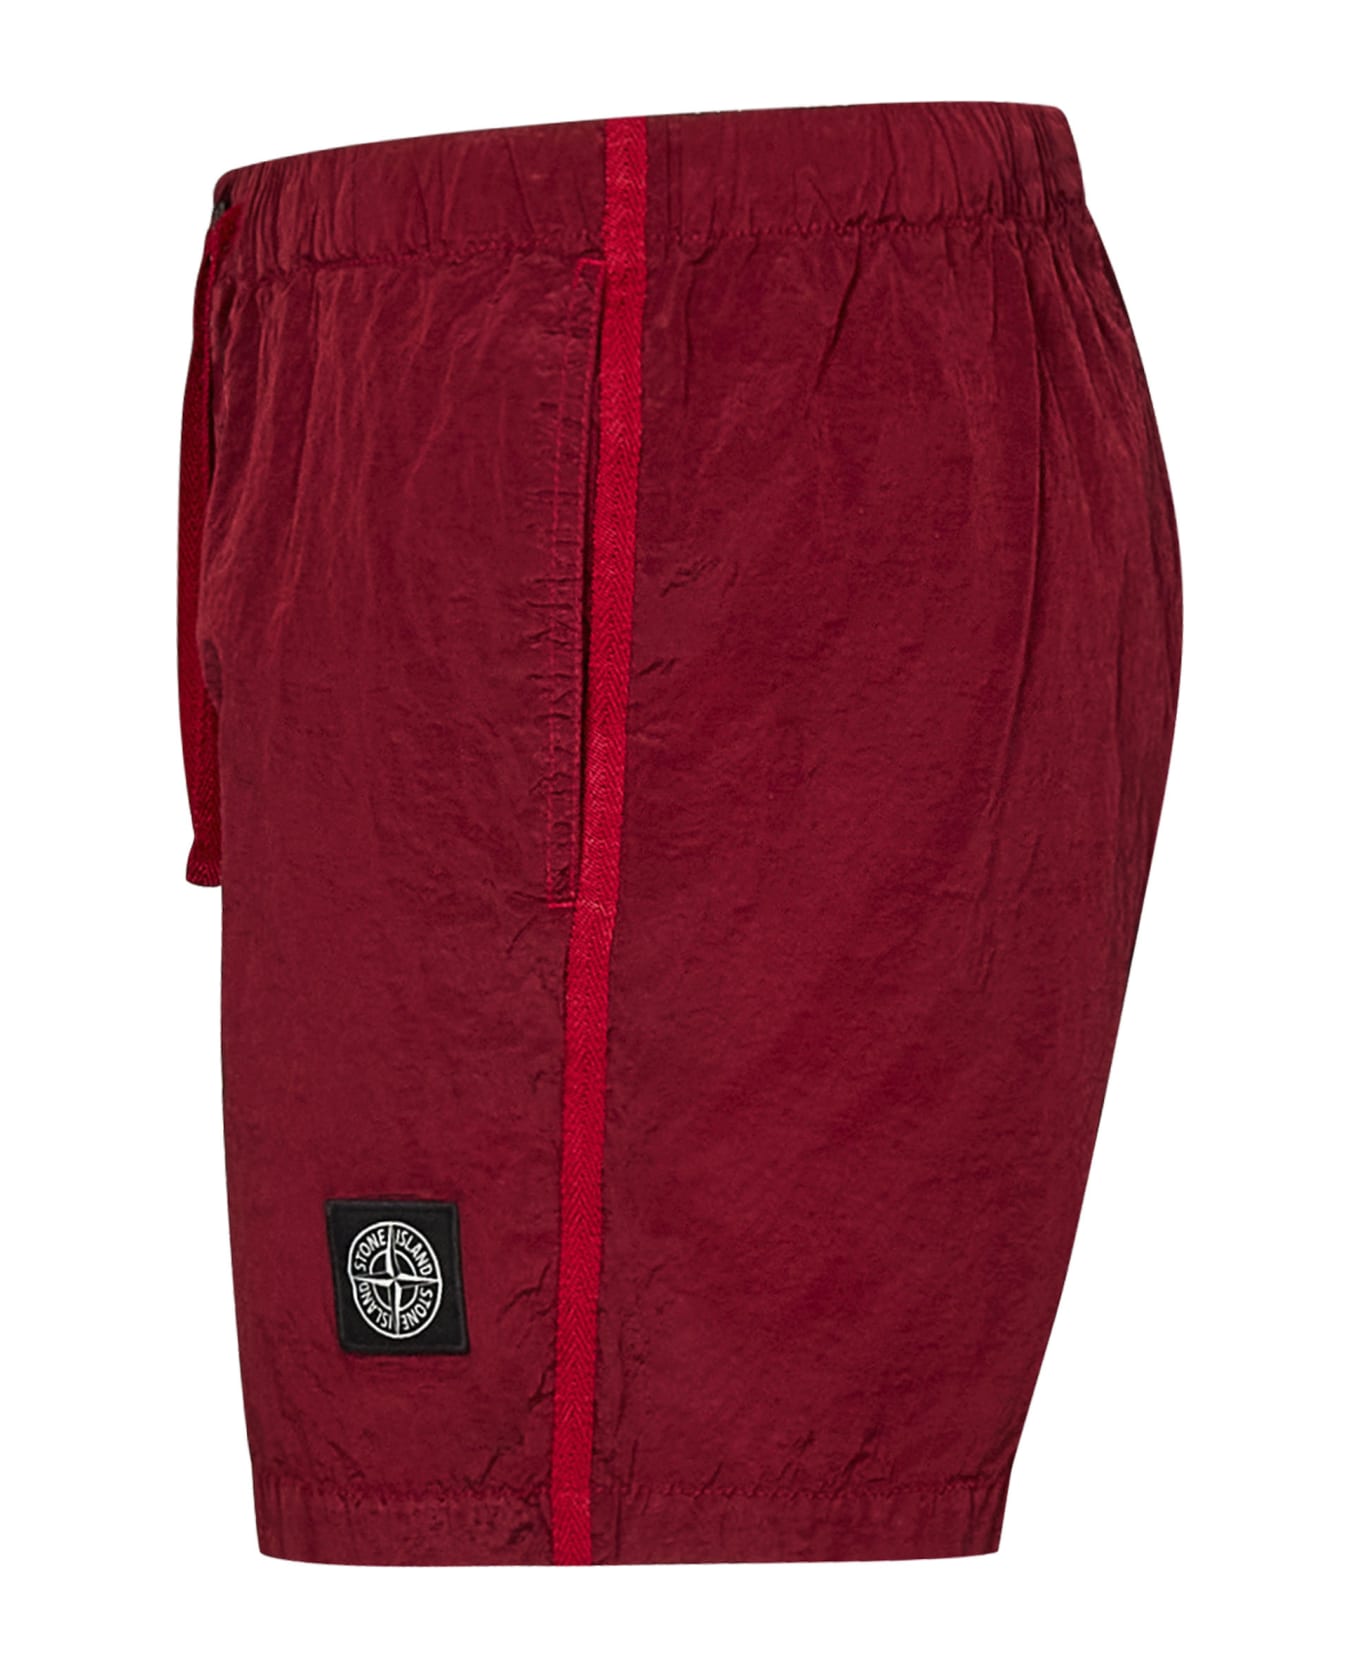 Stone Island Swimsuit - Red